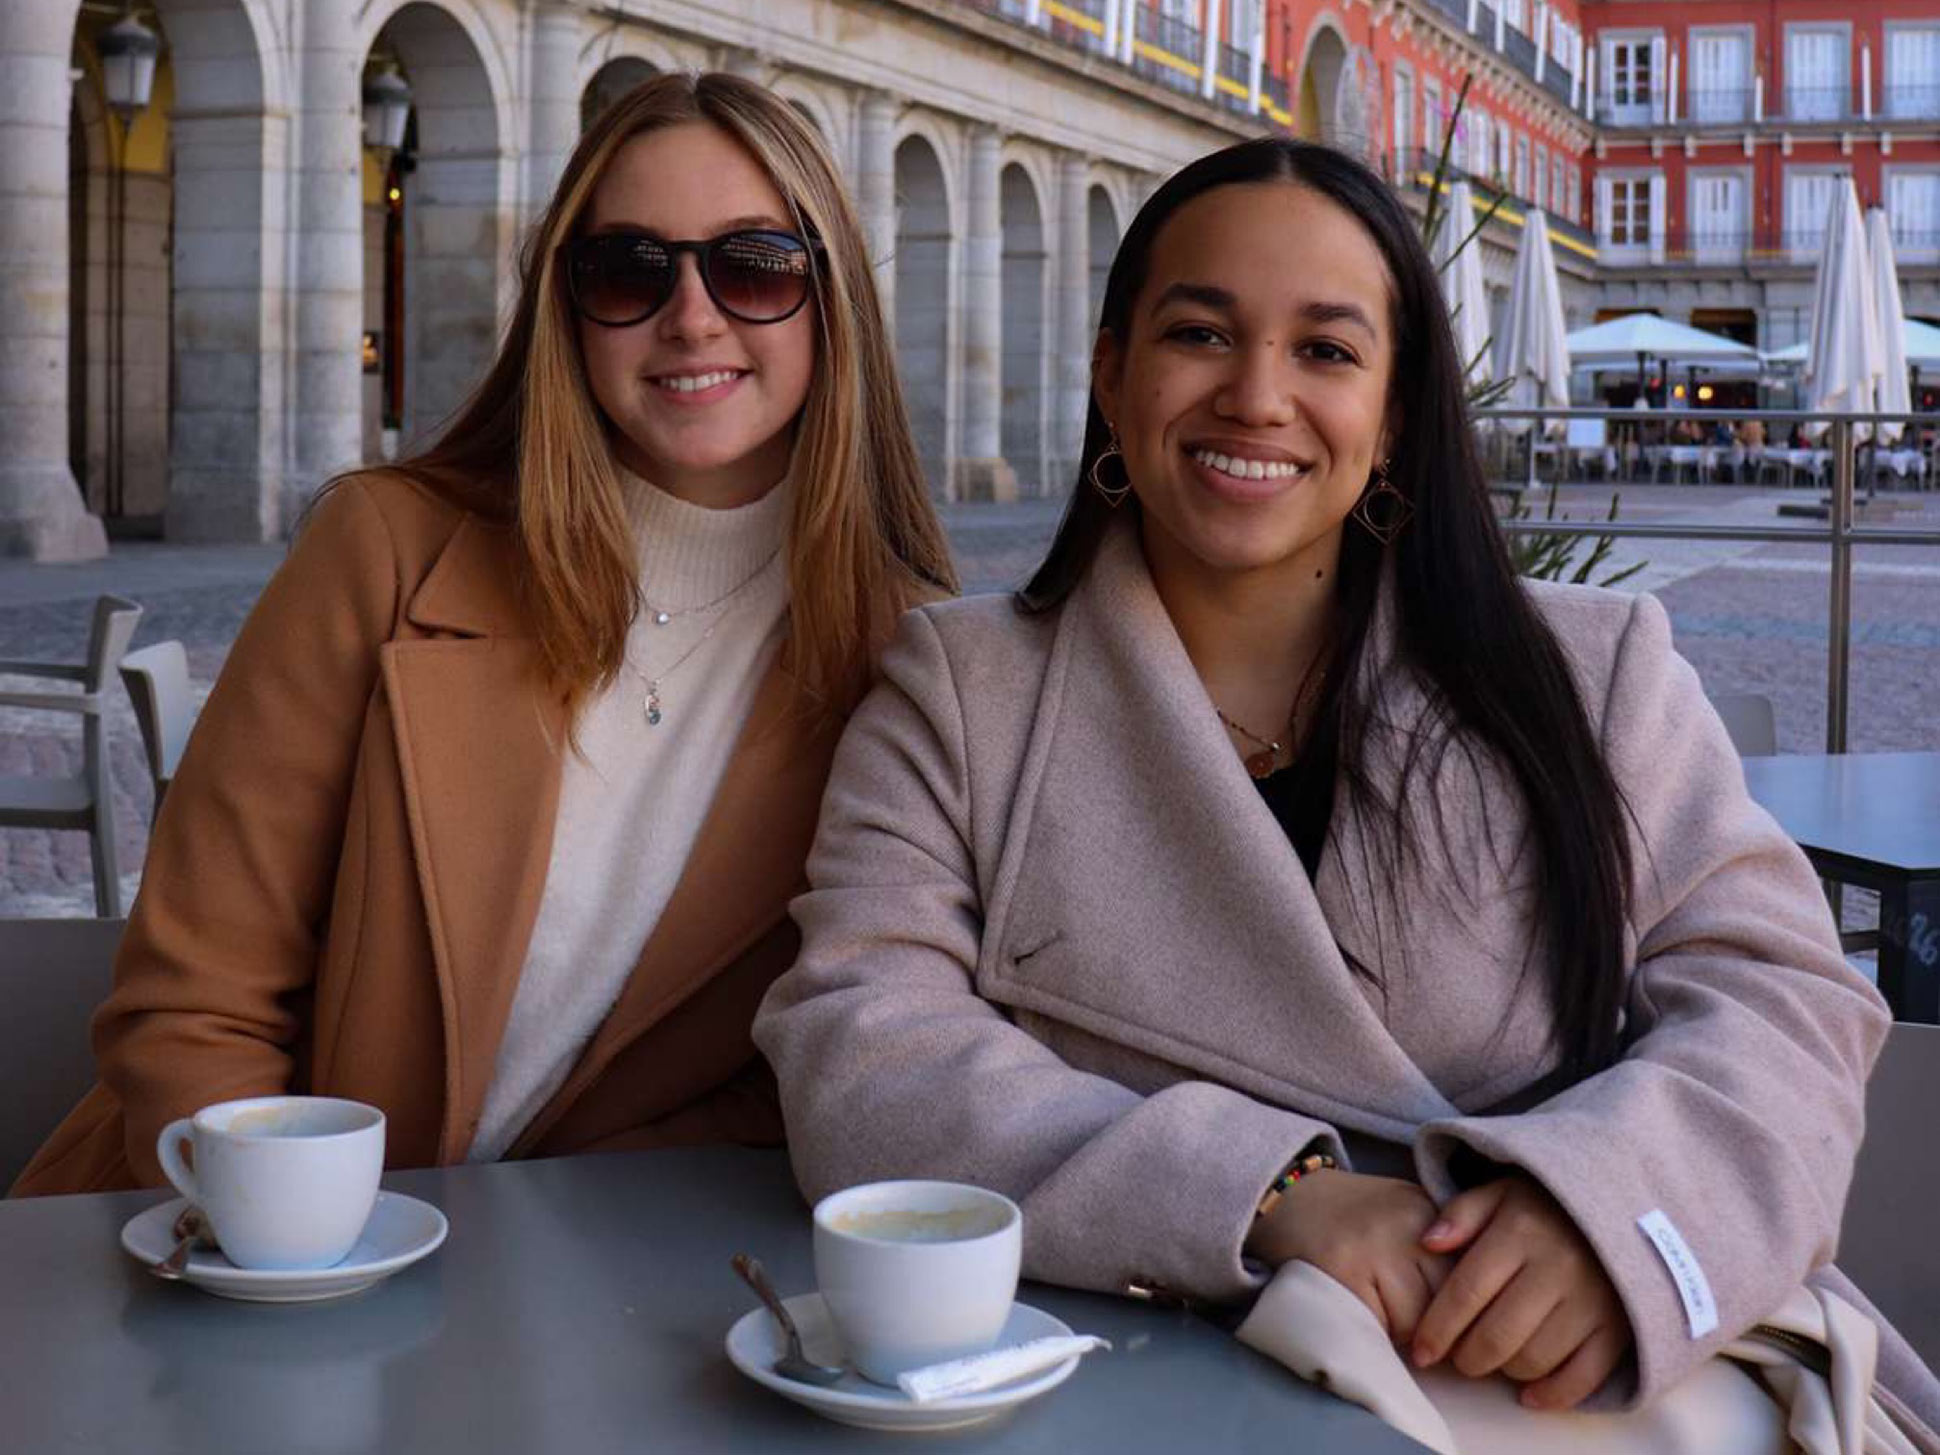 Study Abroad student image two girls with coffee